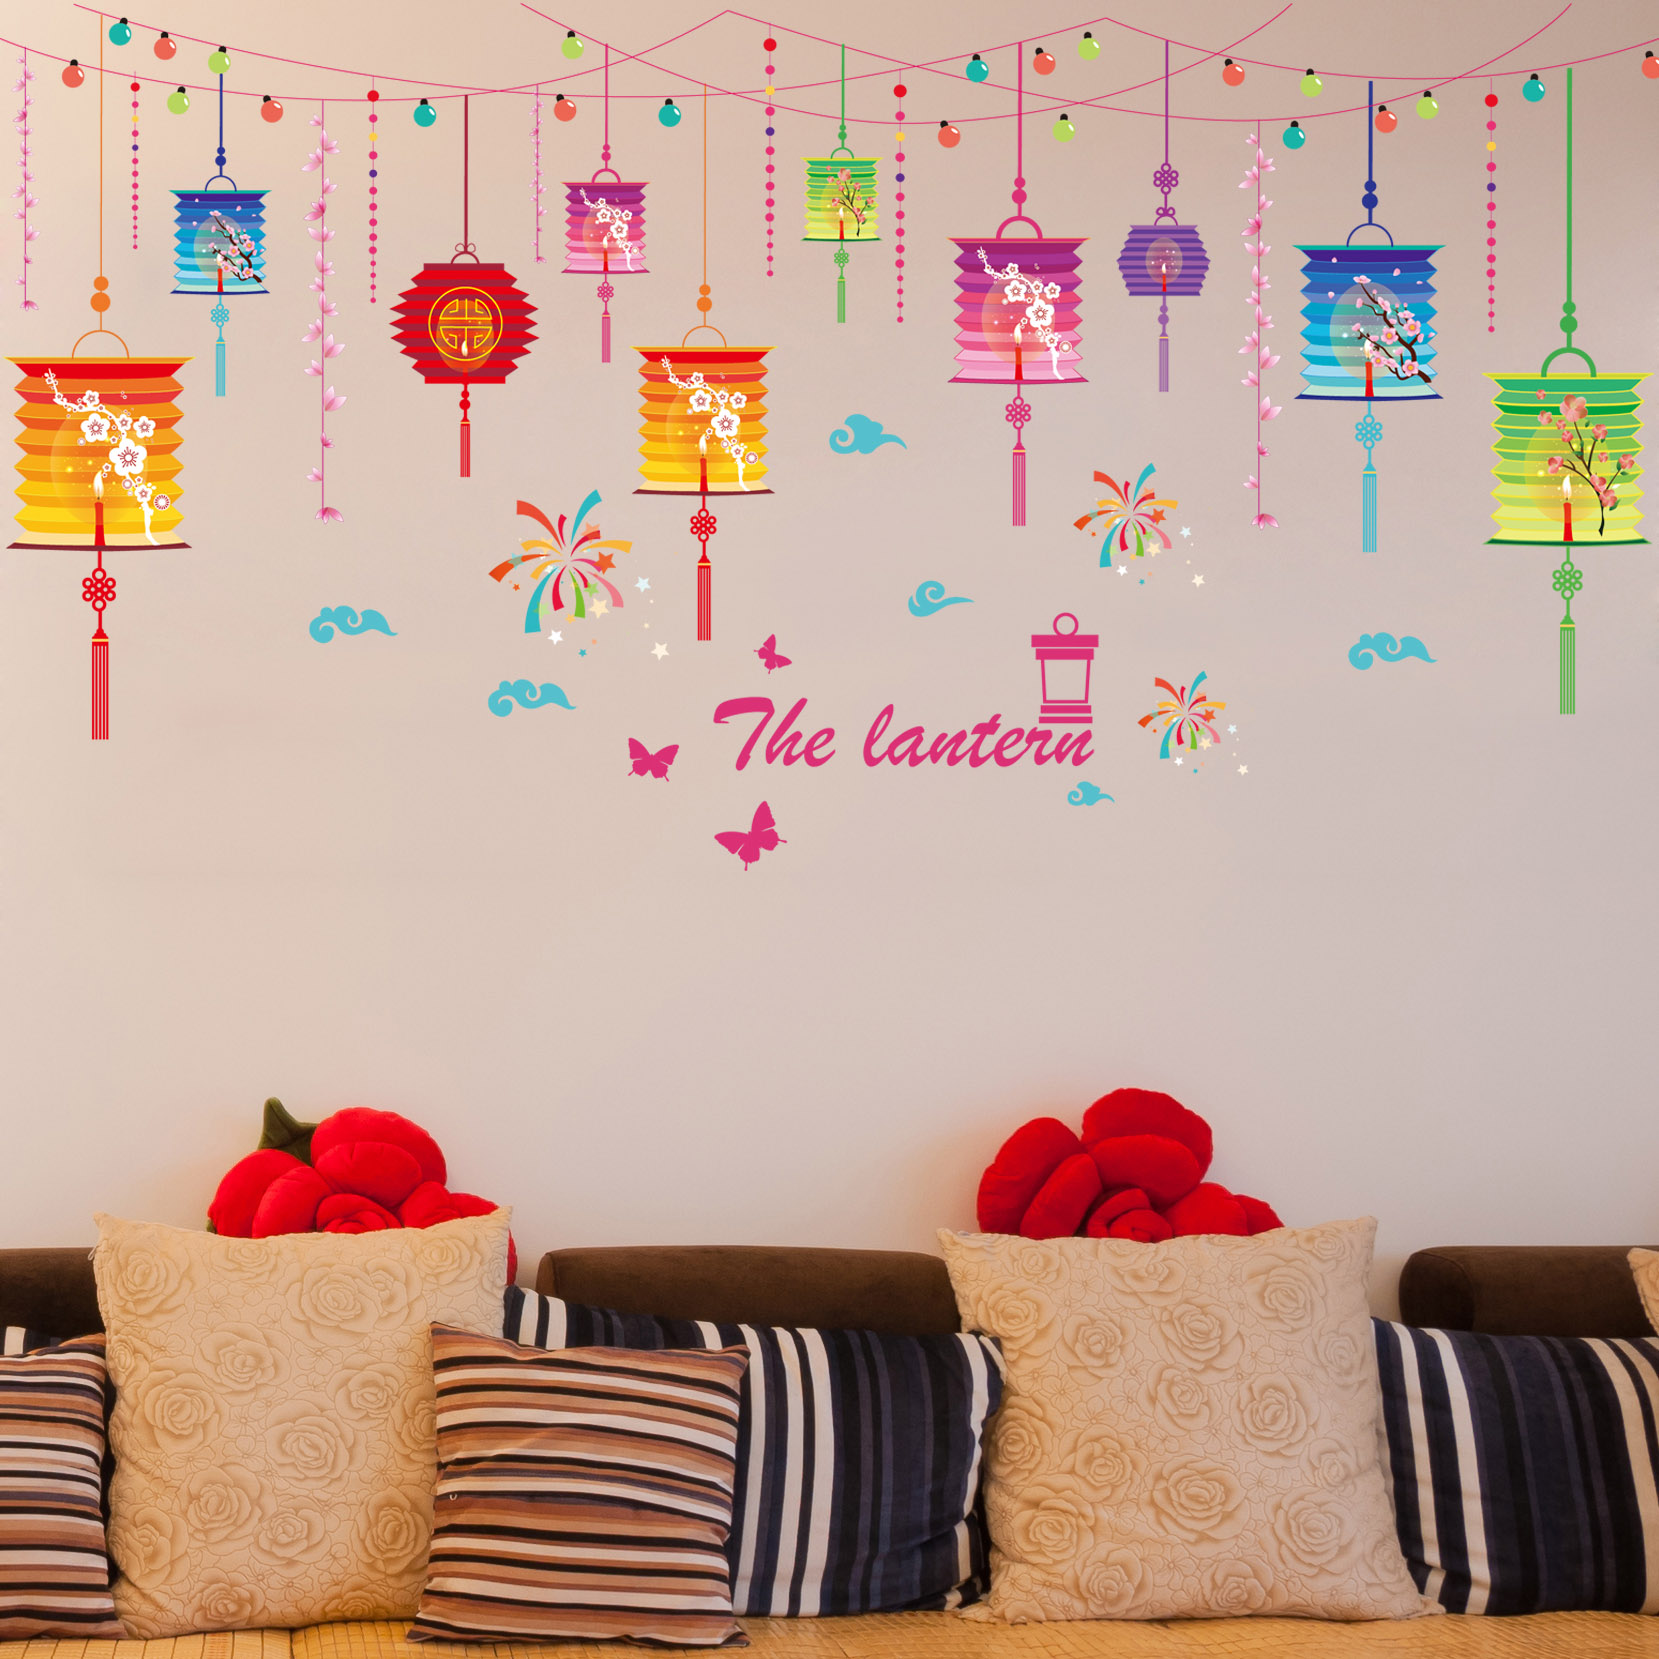 Buy Colored Lanterns Ribbons Arranged Wall Stickers Bedroom Living Room Wall Decorations Wall Stickers Wall Painting Ideas In Cheap Price On Alibaba Com